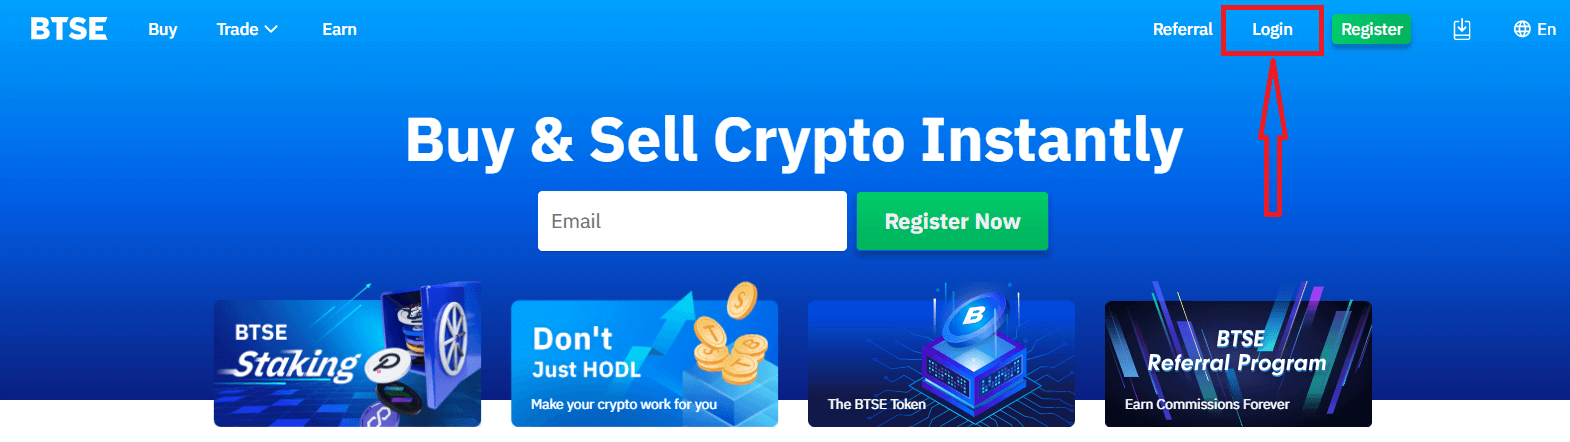 How to Login and start trading Crypto at BTSE